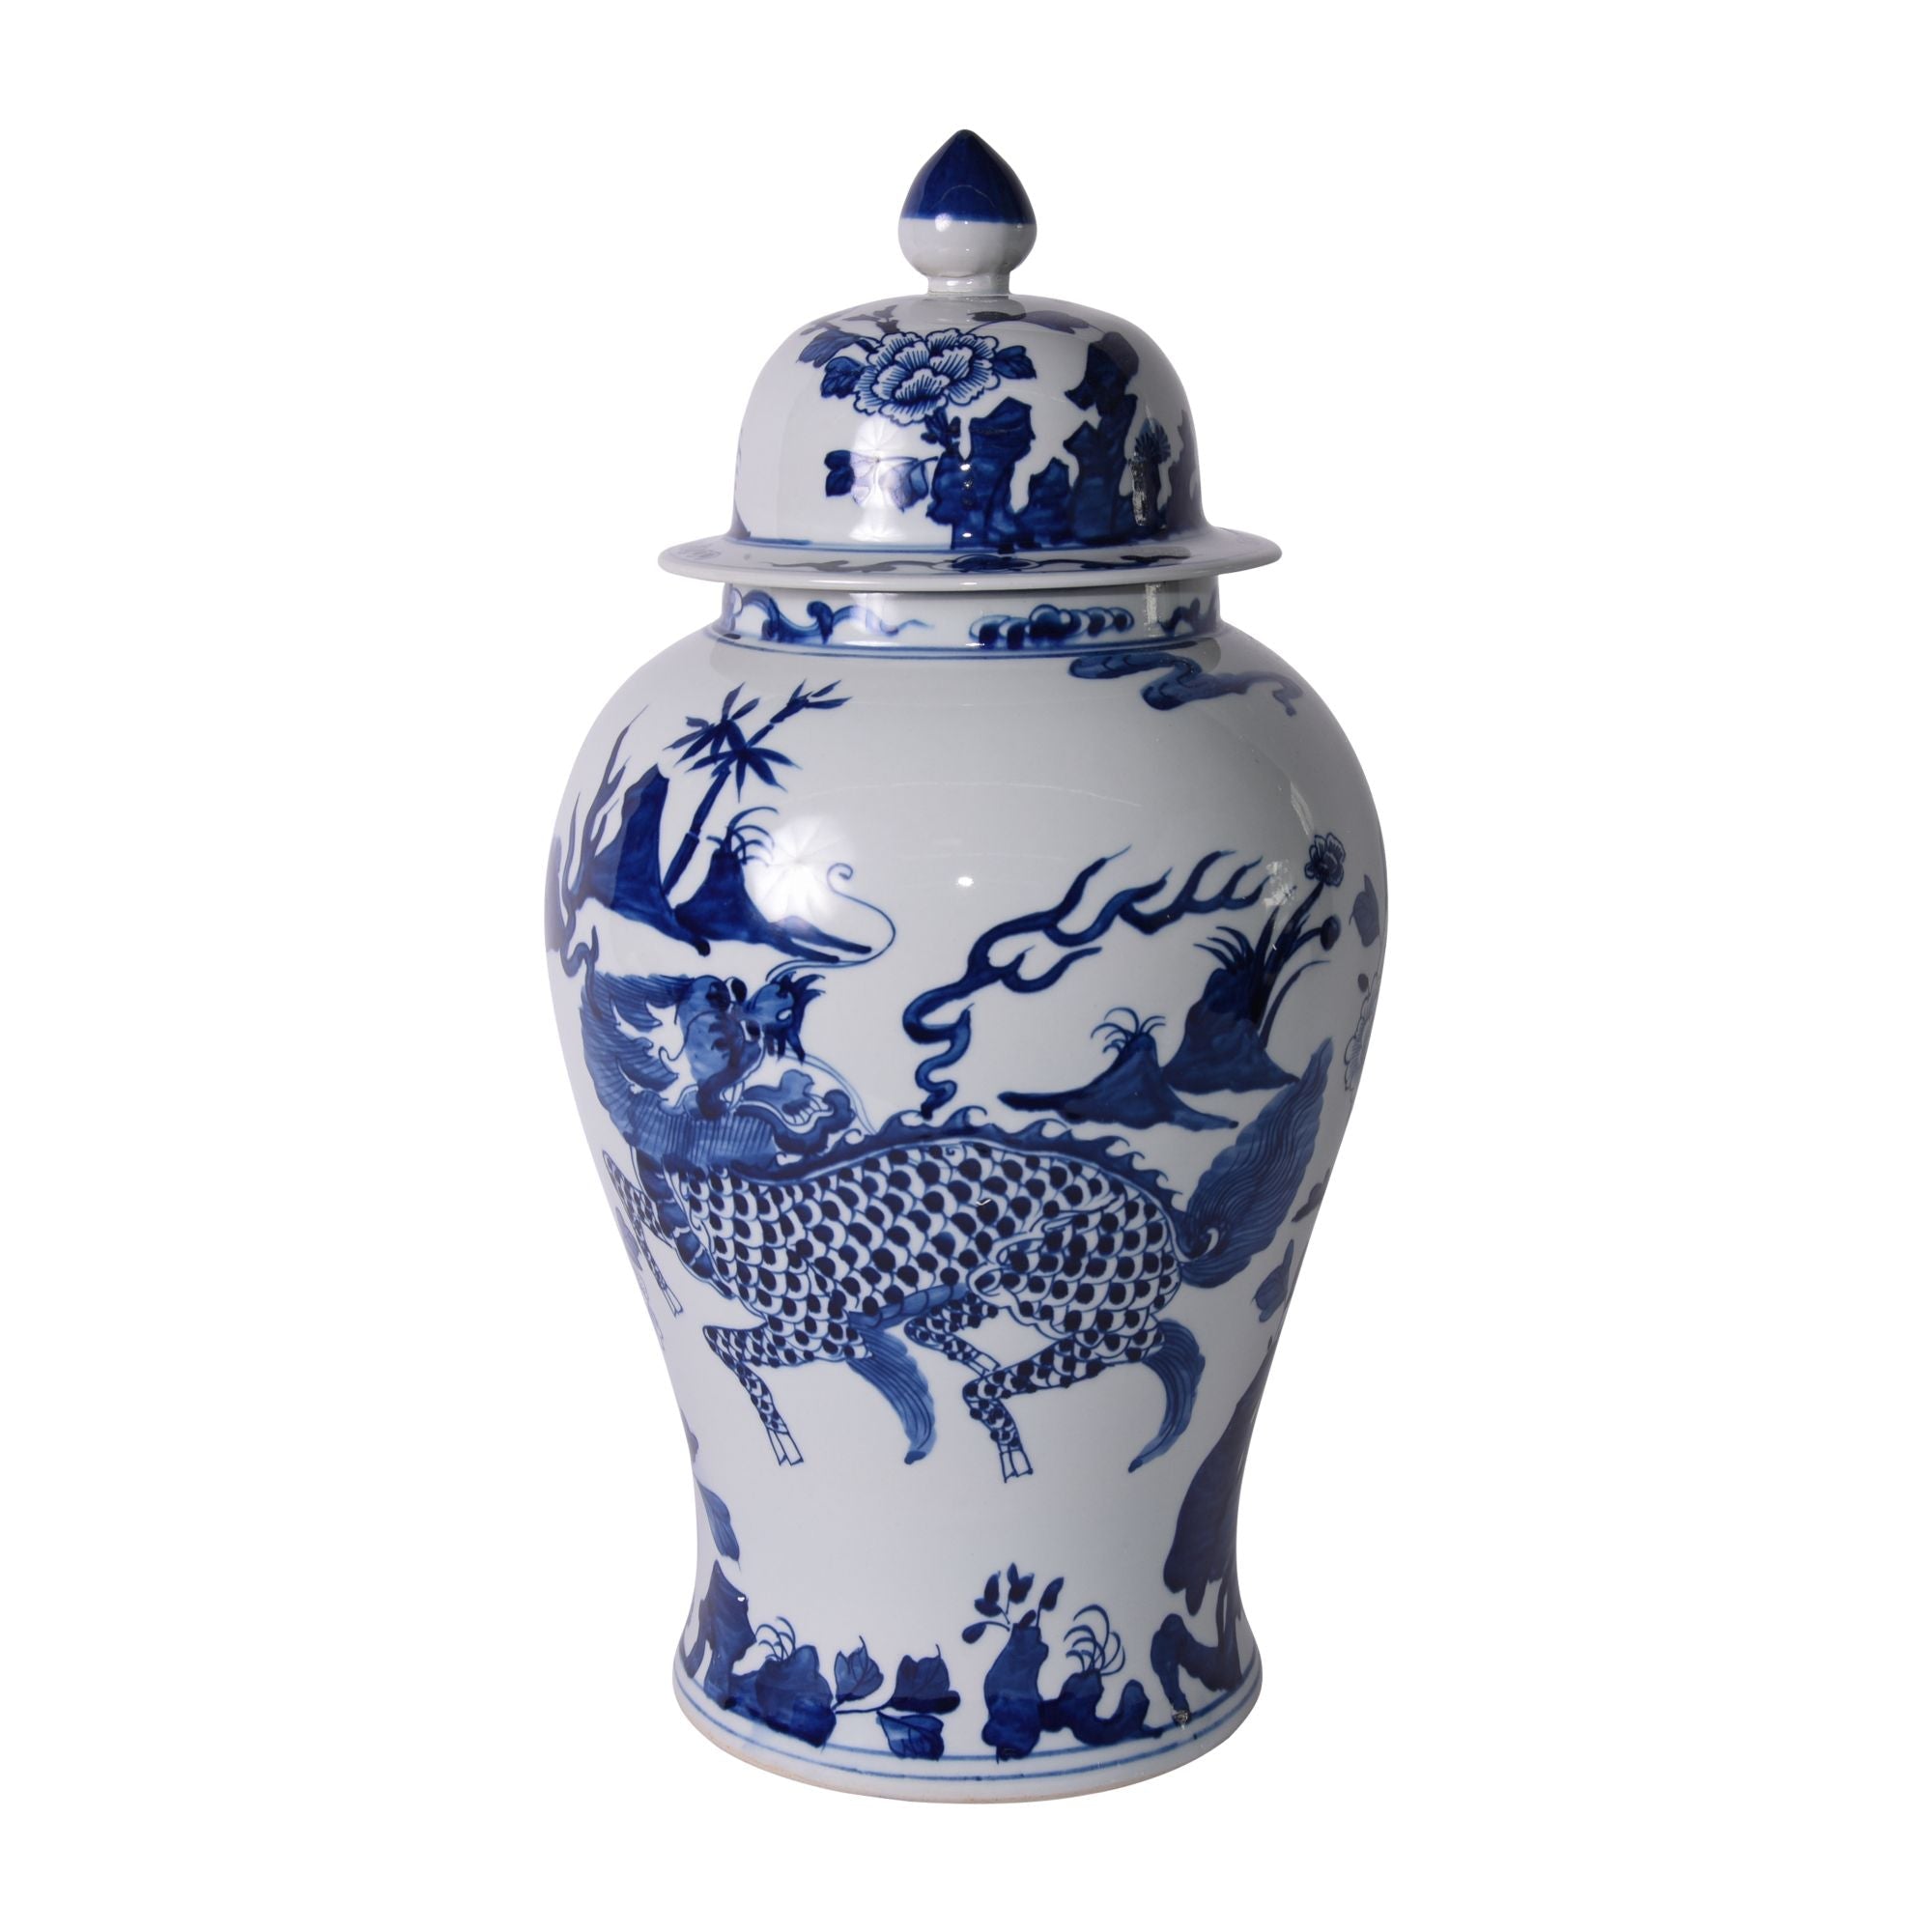 Legend of Asia Giftware Legend of Asia B&W Kylin Temple Jar